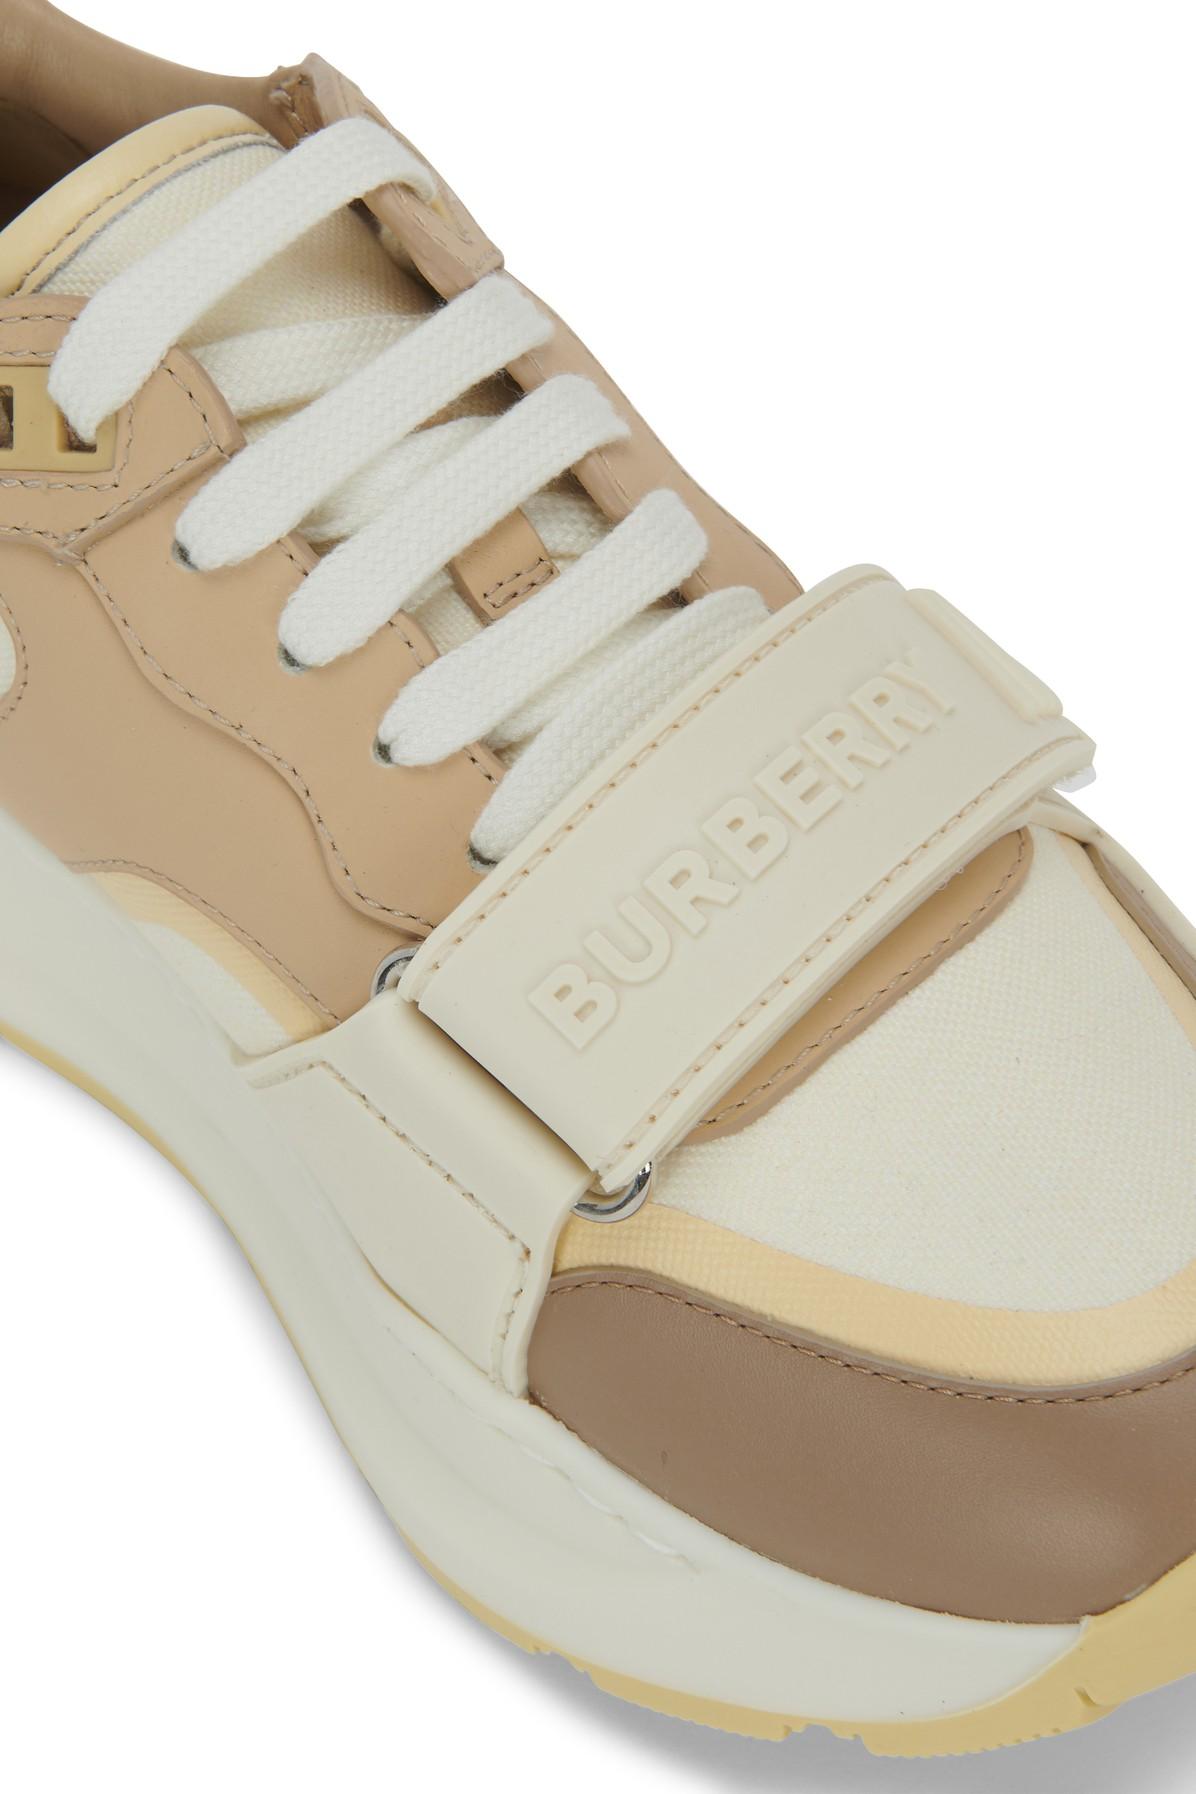 Burberry Ramsey L Story Sneakers - Lyst